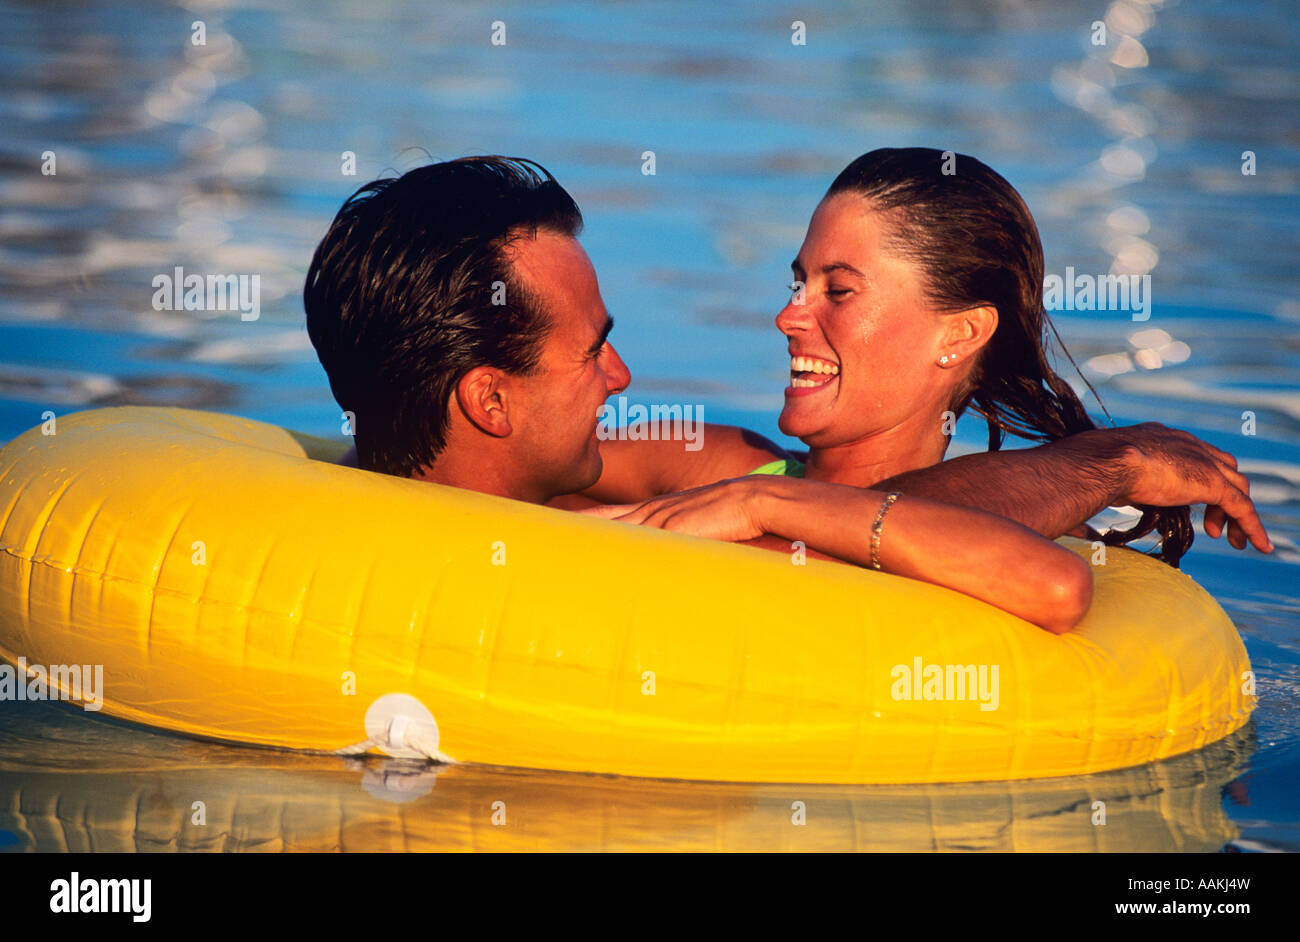 1980s HAPPY YOUNG COUPLE FLOATING IN PLASTIC INNER TUBE IN THE POOL Stock  Photo - Alamy